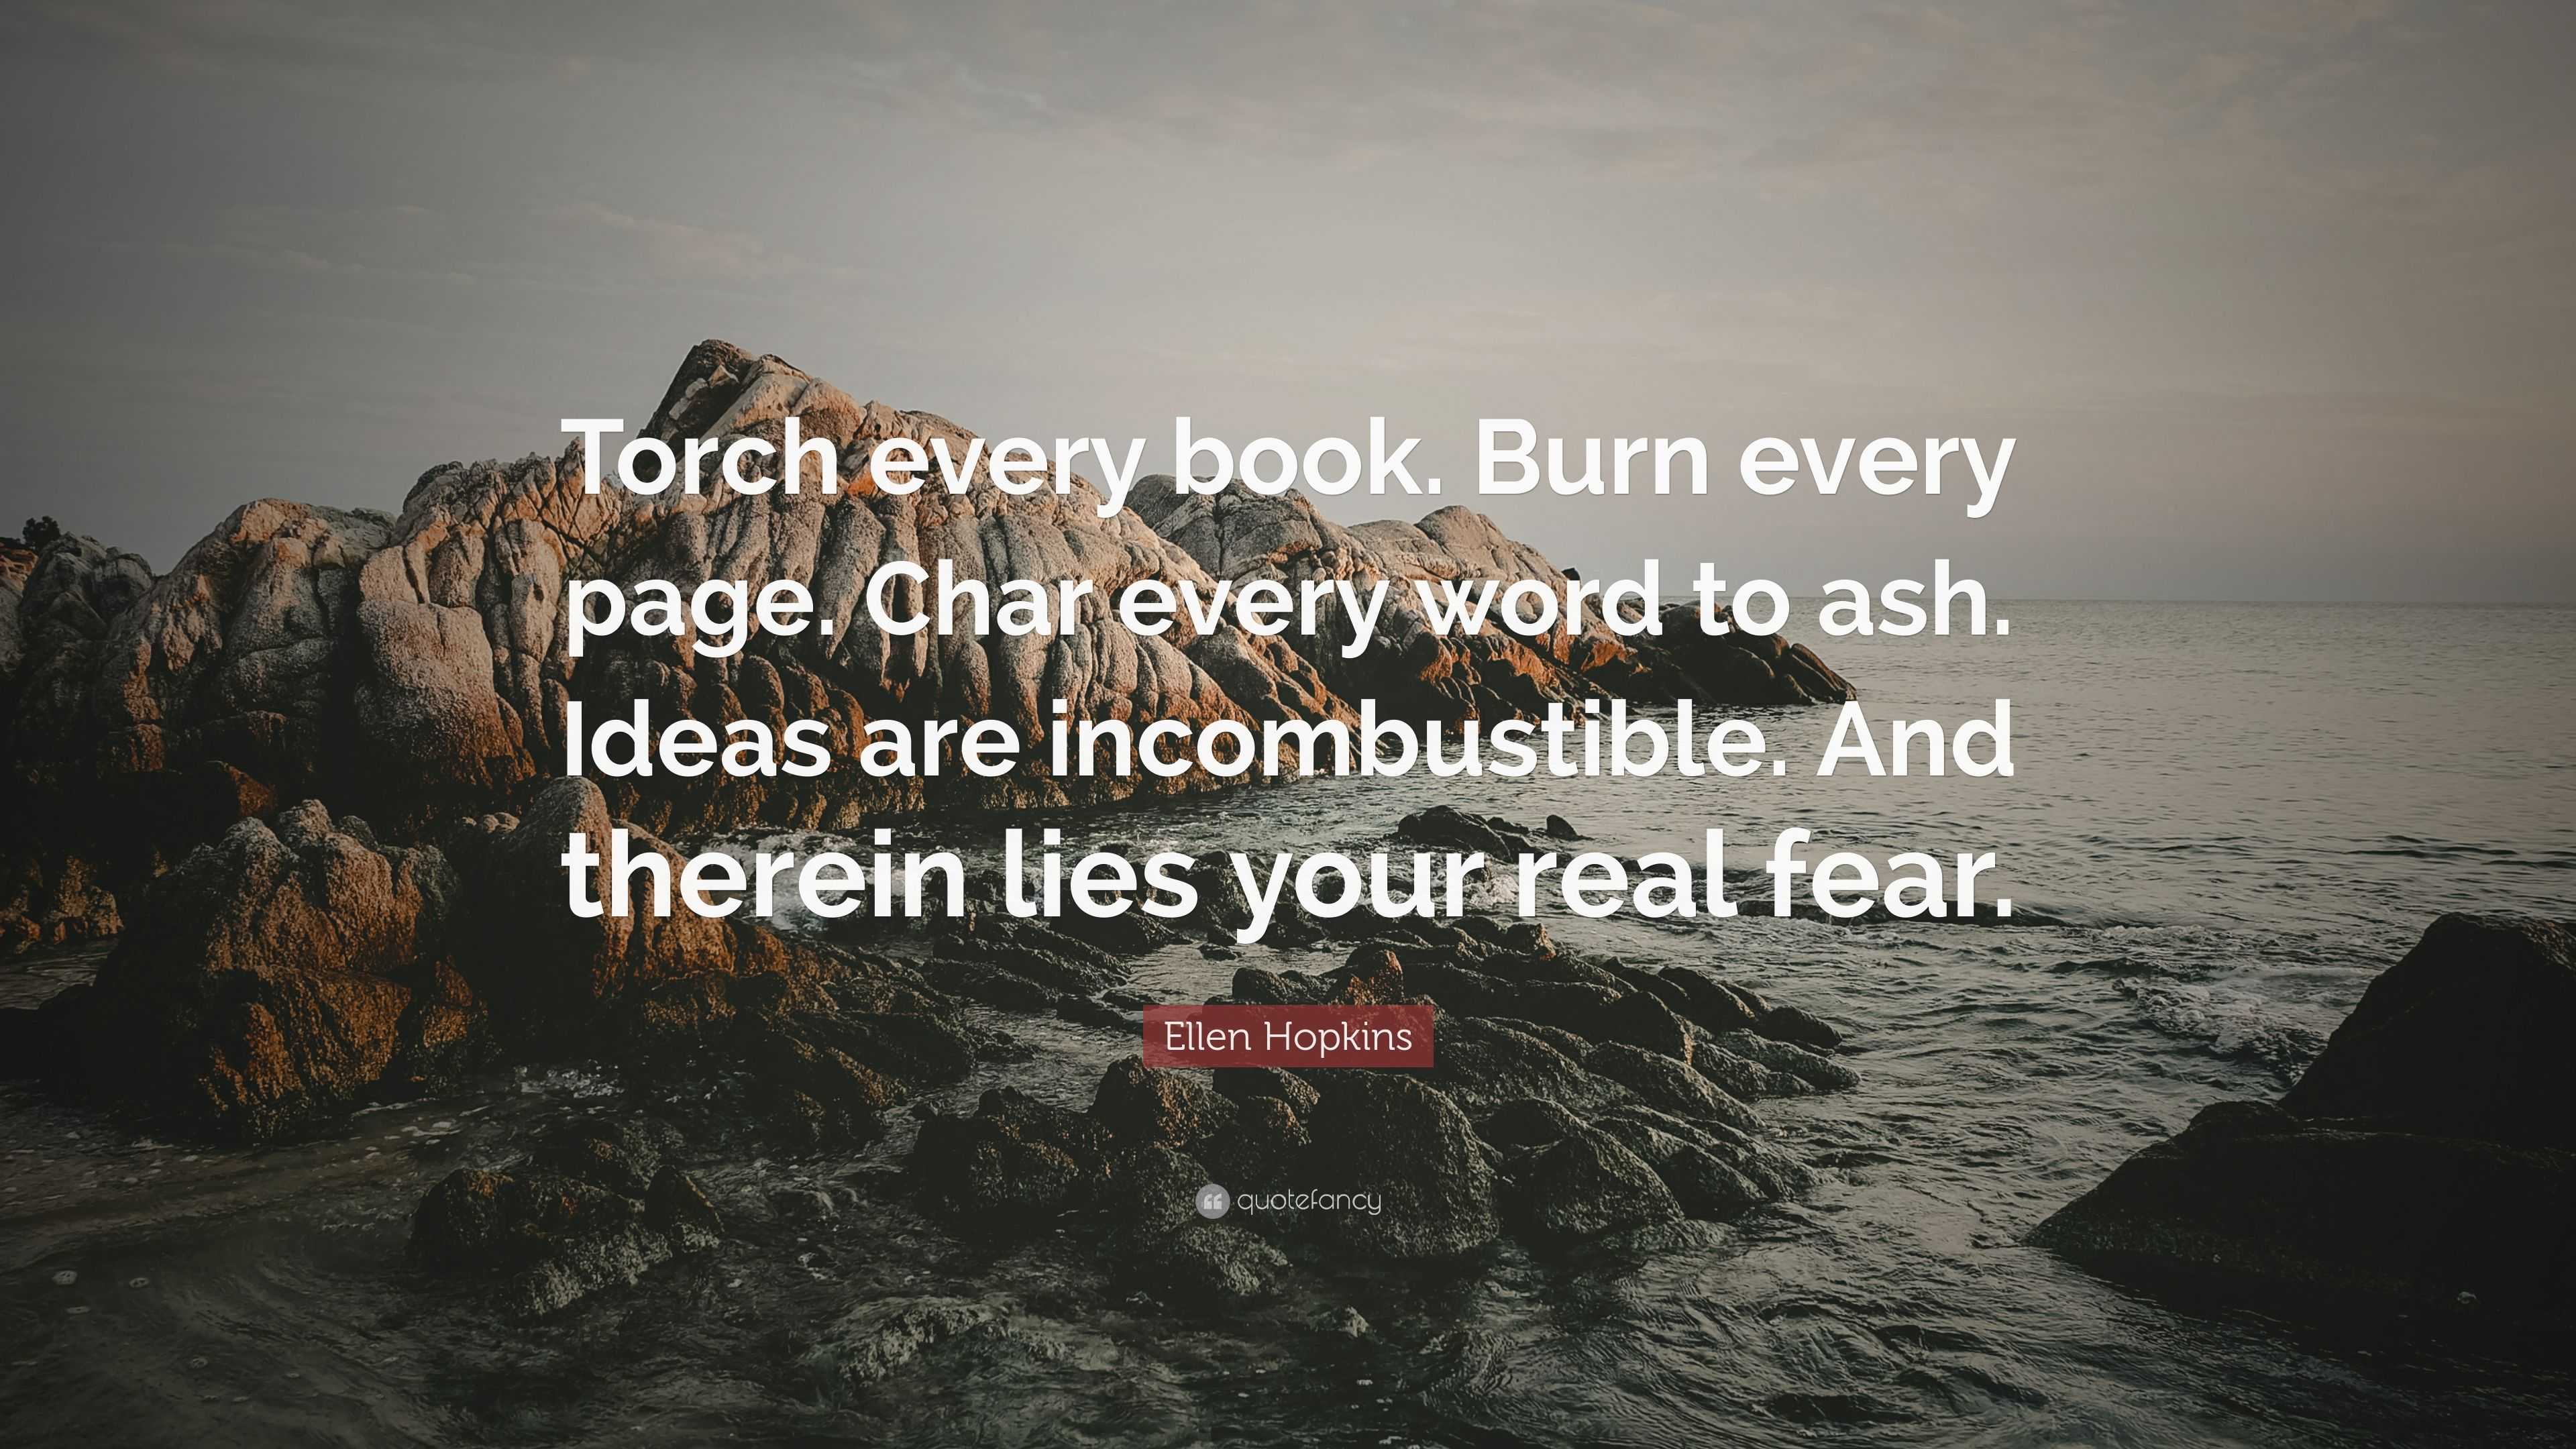 Ellen Hopkins Quote: “Torch every book. Burn every page. Char every